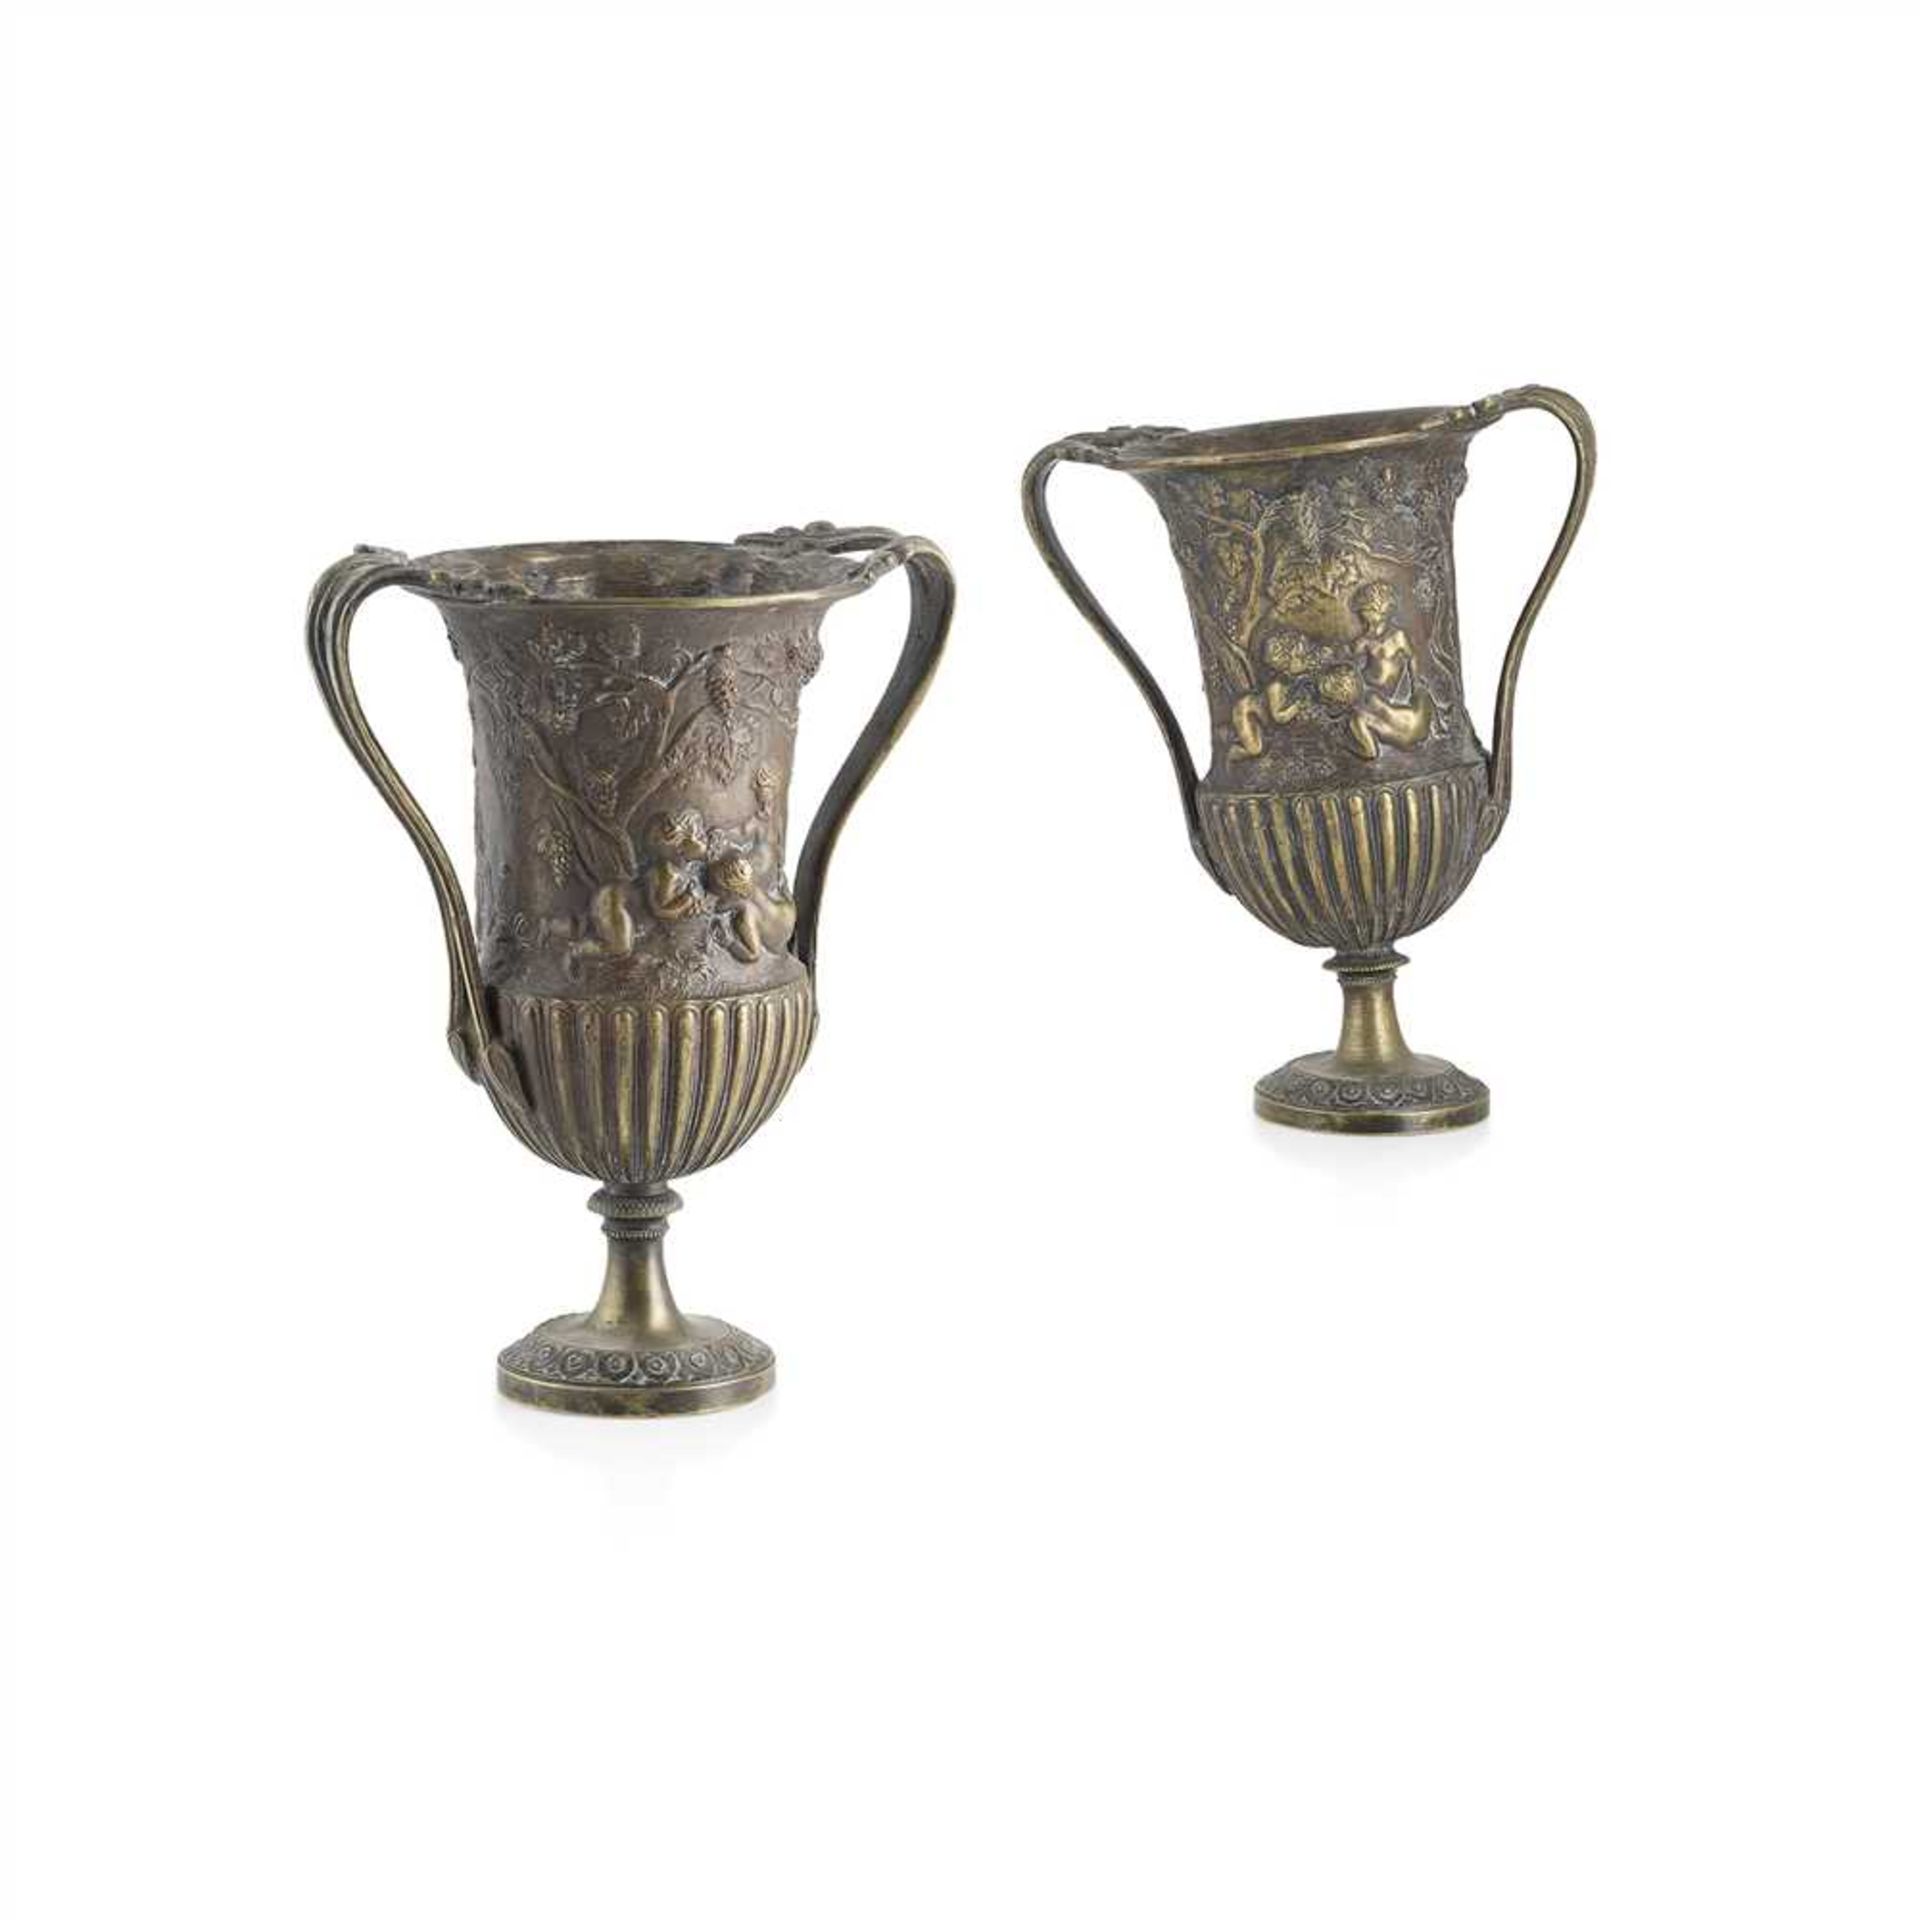 PAIR OF CLASSICAL STYLE BRONZE URNS